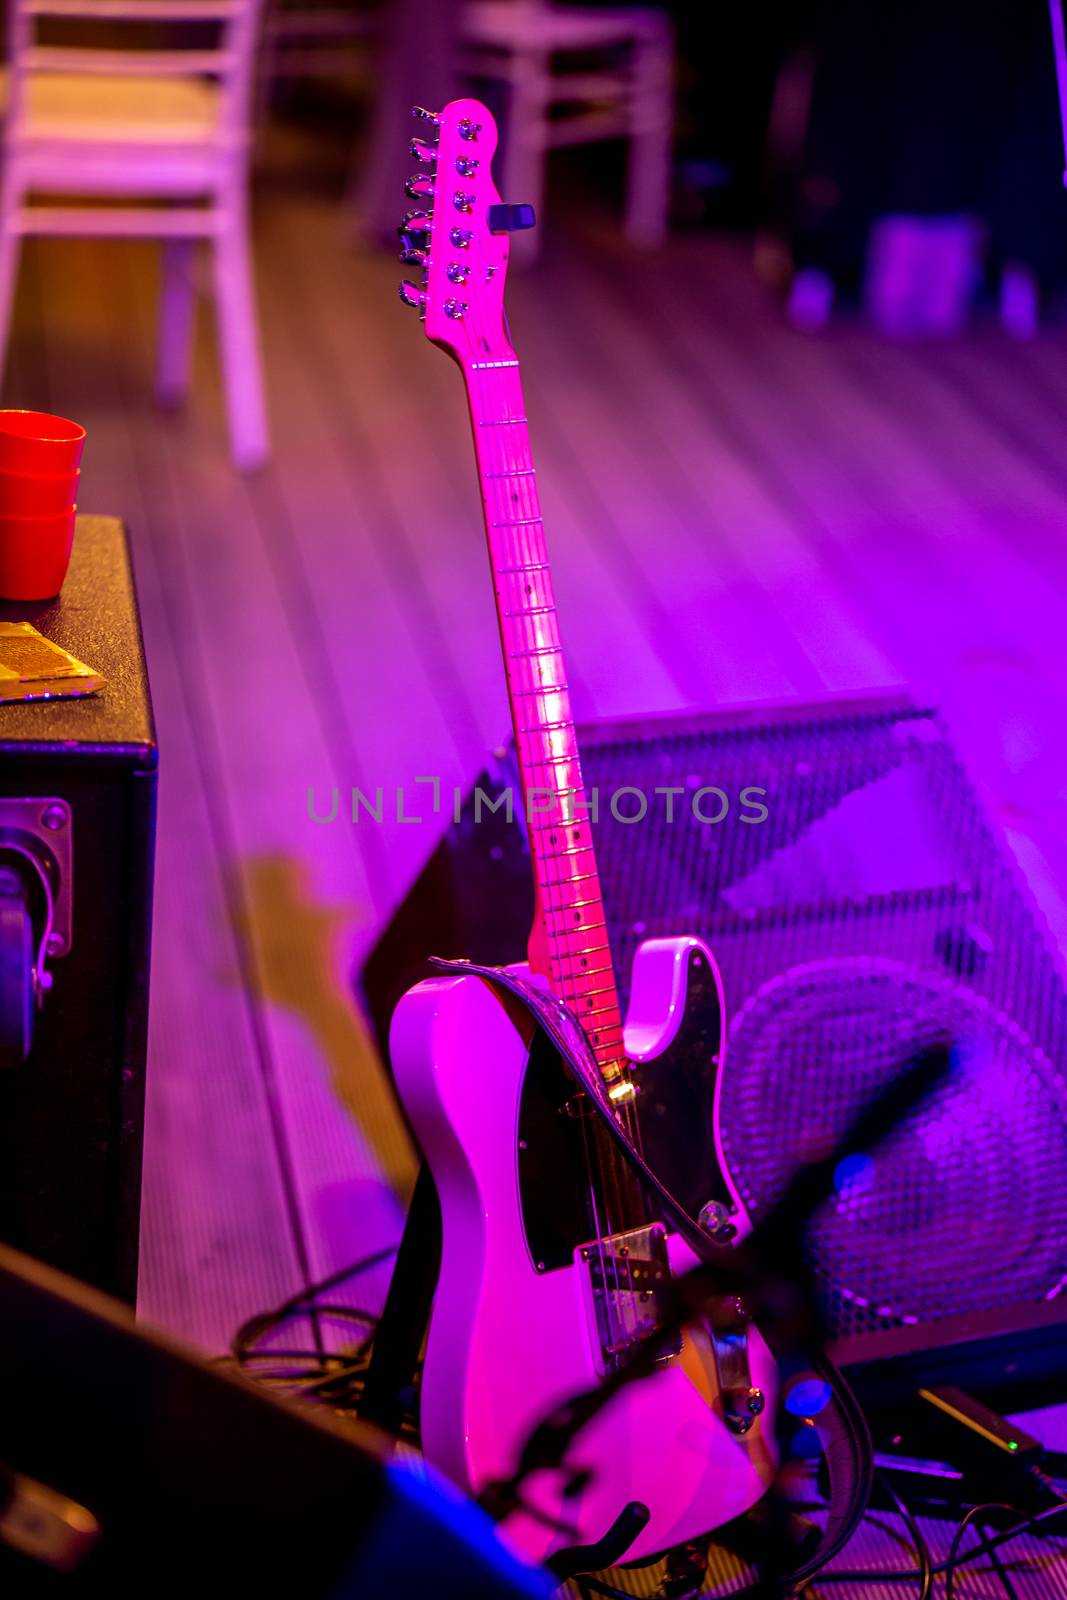 Electric guitar and sound amplifier in multicolored light during celebrations on stage. Empty abstract light illuminated stage with electric guitar and sound amplifier